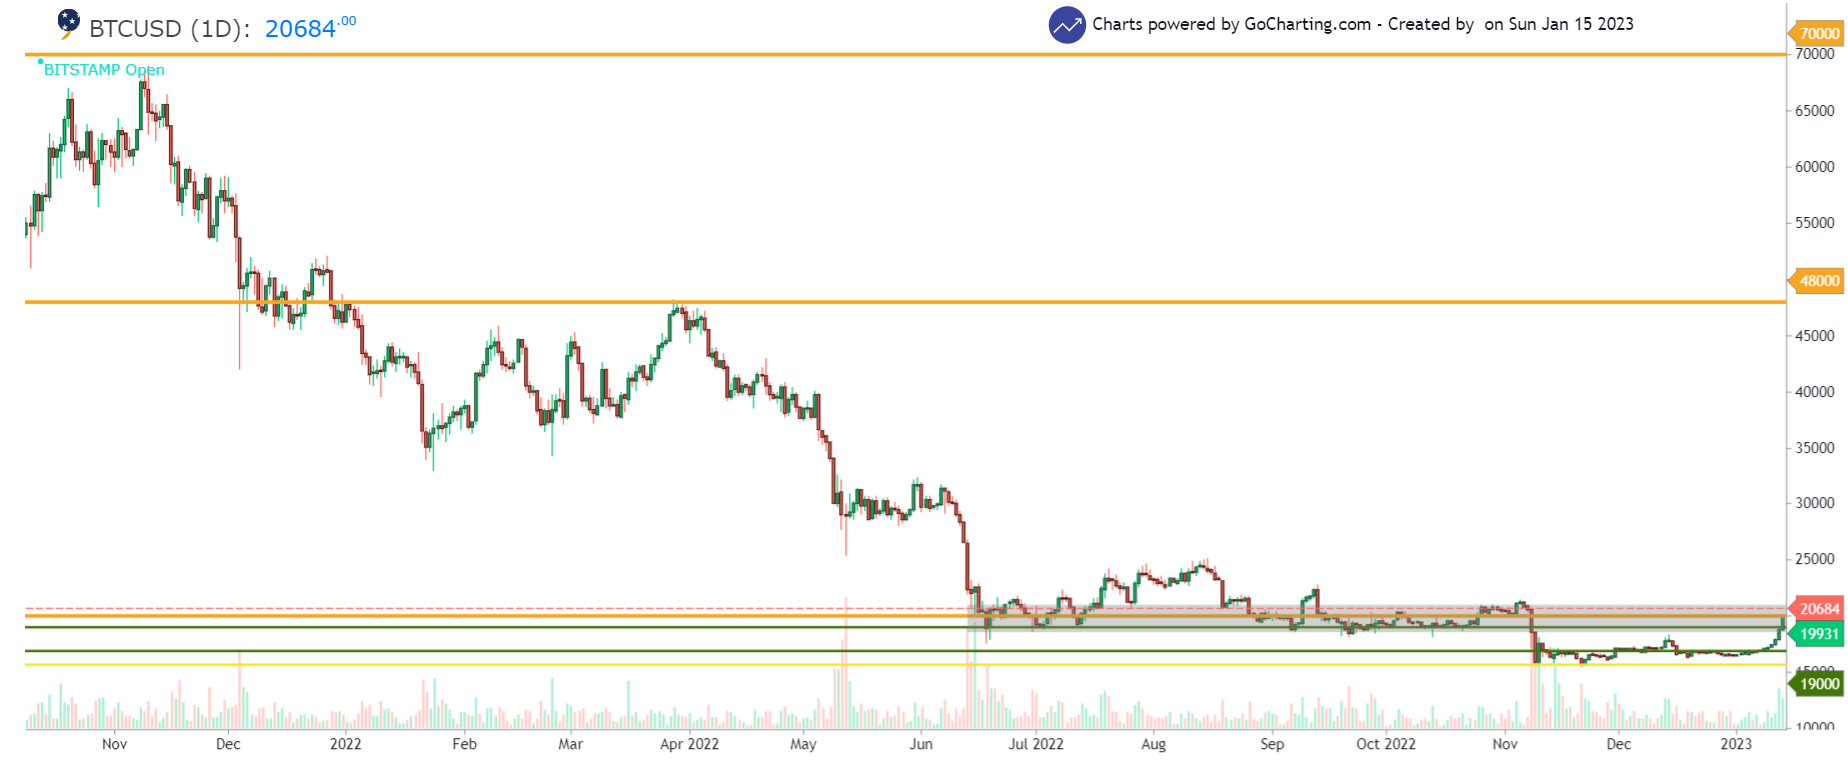 BTC/USD 1-day chart showing Bitcoin price in 2022